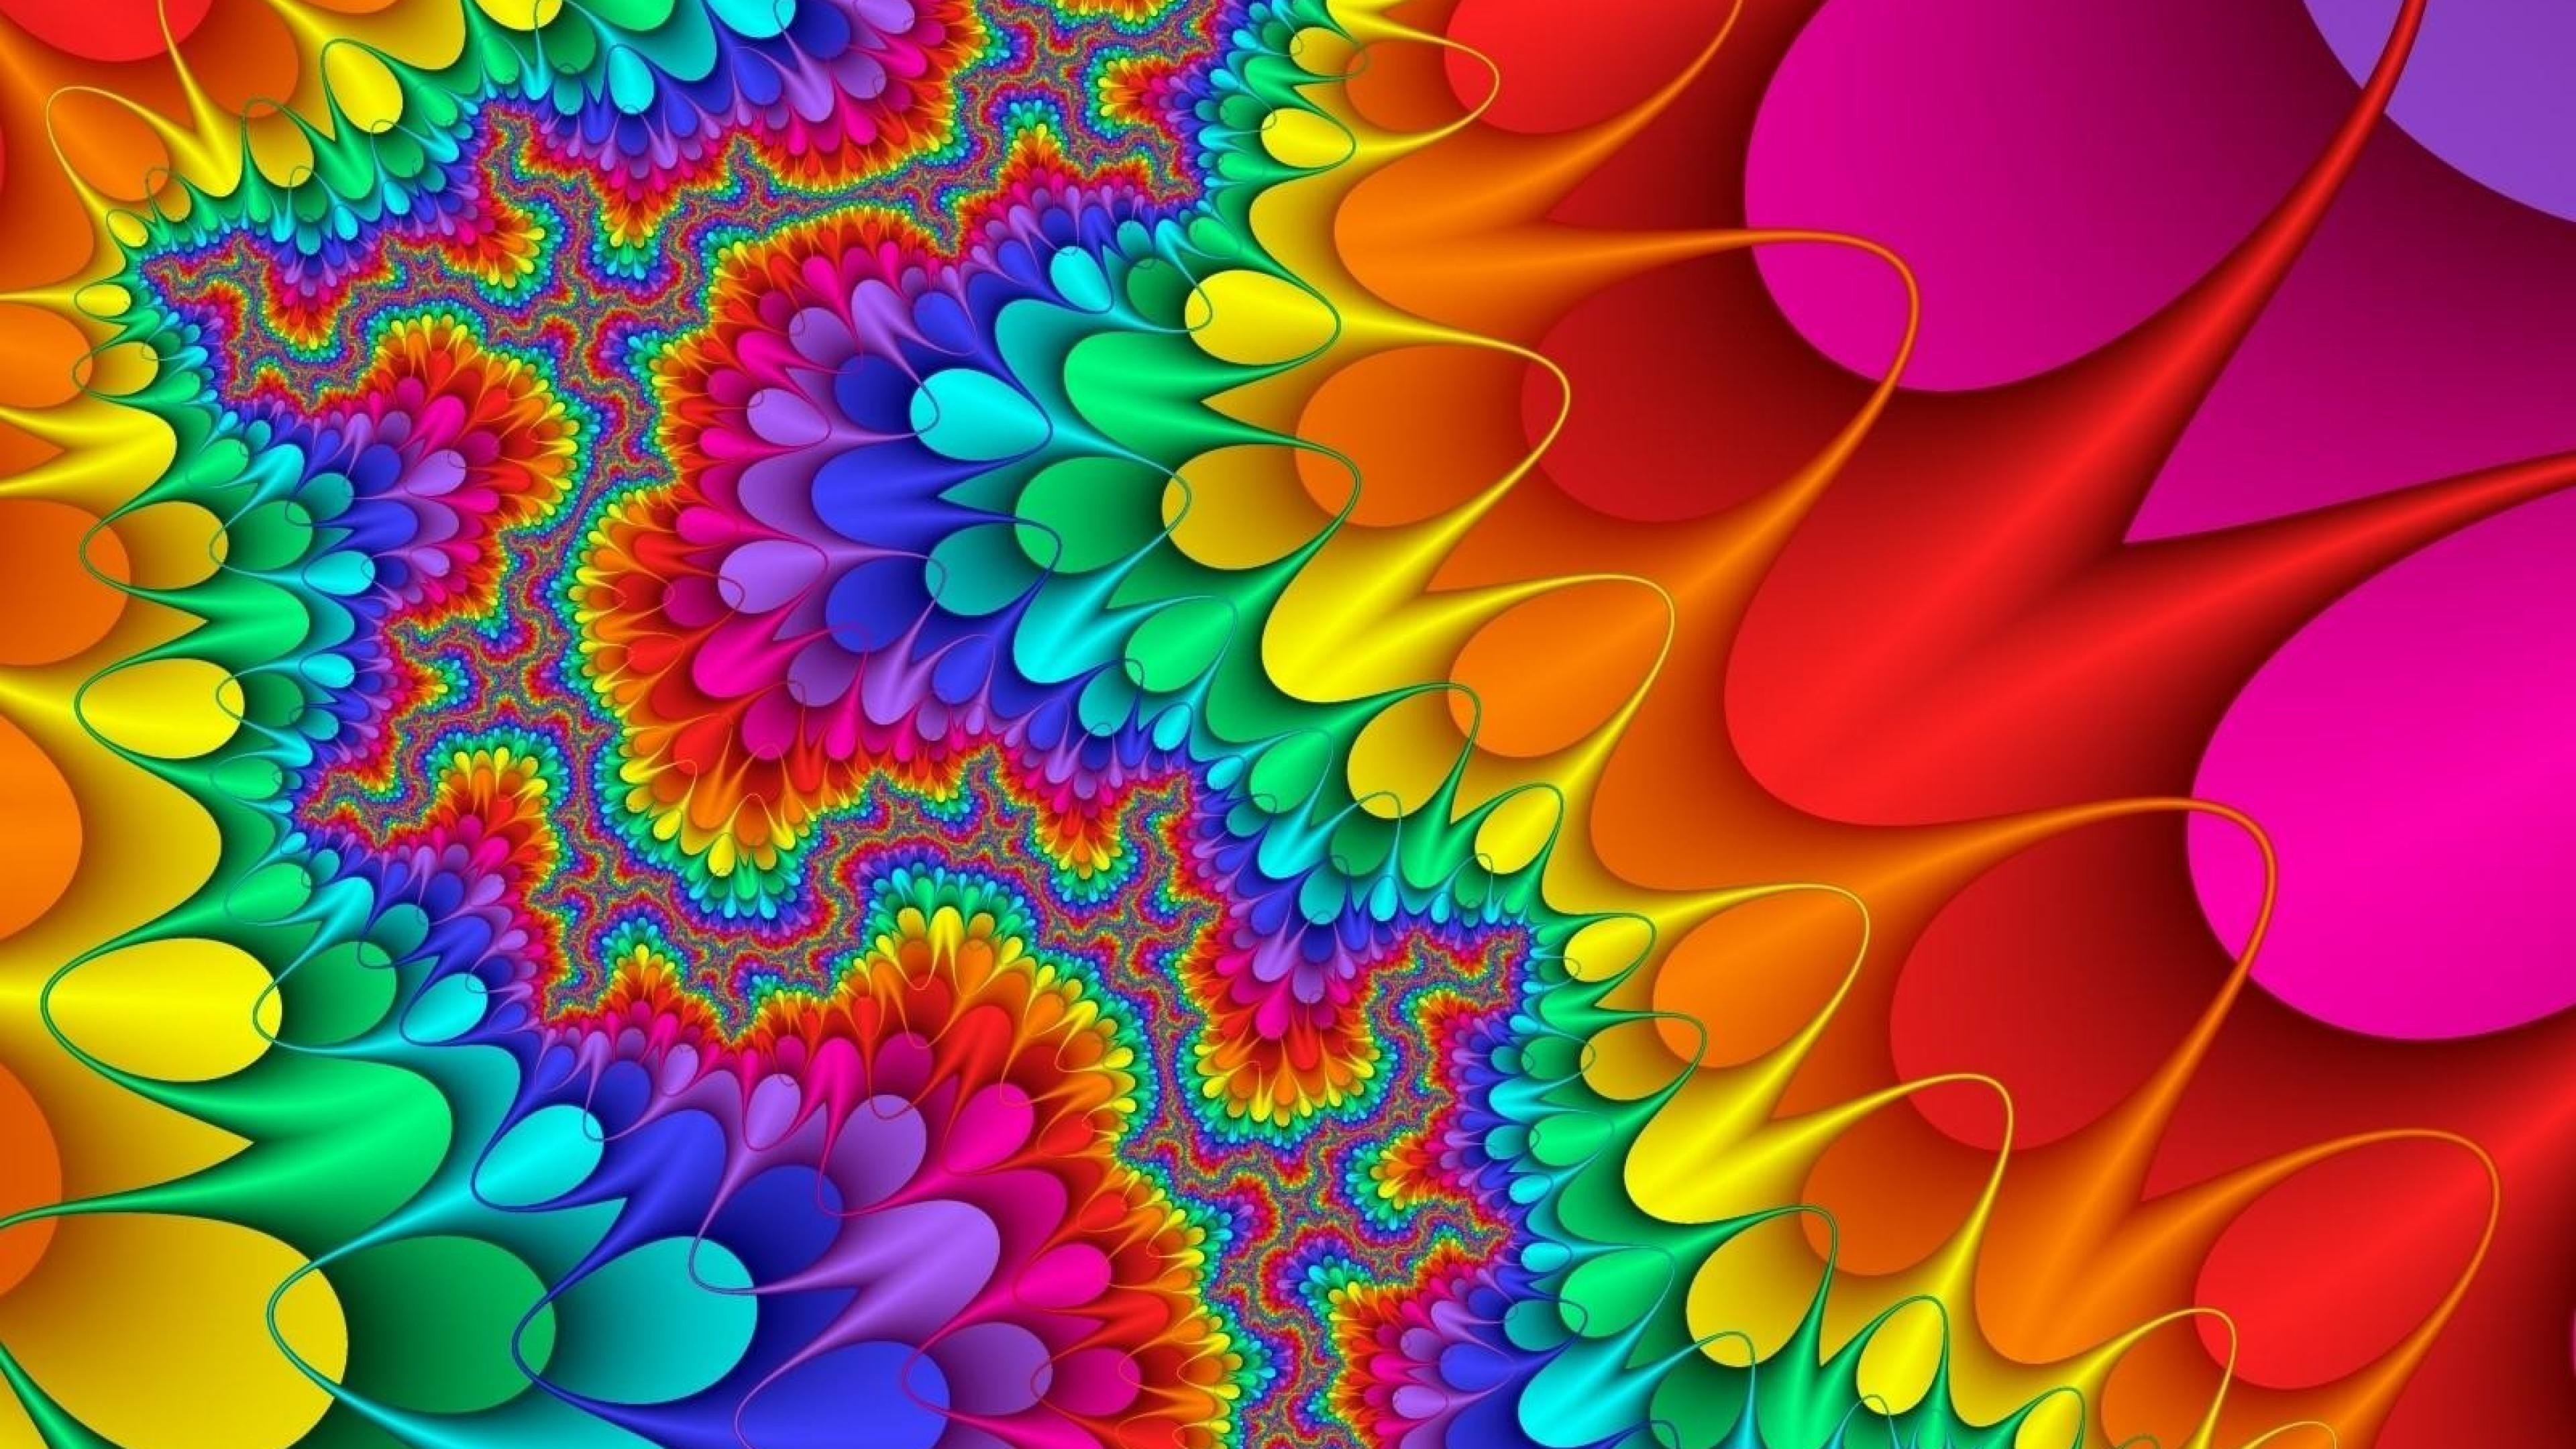 Colorful Wallpaper Designs background picture